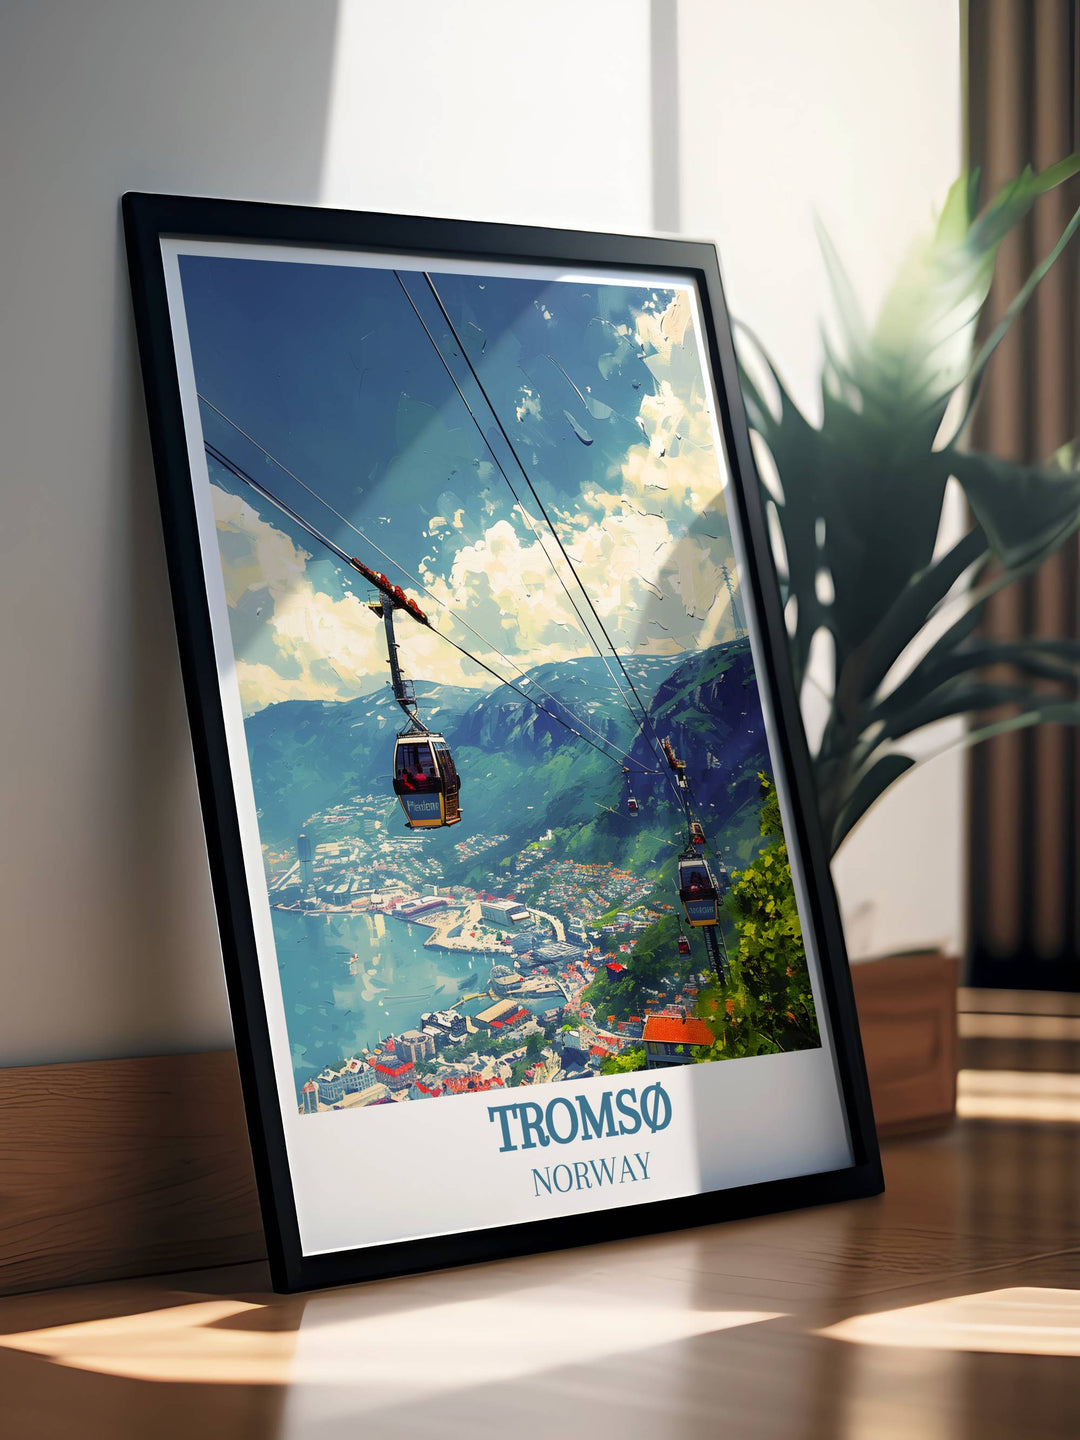 Stunning travel poster of Tromso, Norway, with the Fjellheisen cable car, evoking a sense of adventure and wonder, perfect for inspiring your next Nordic journey.